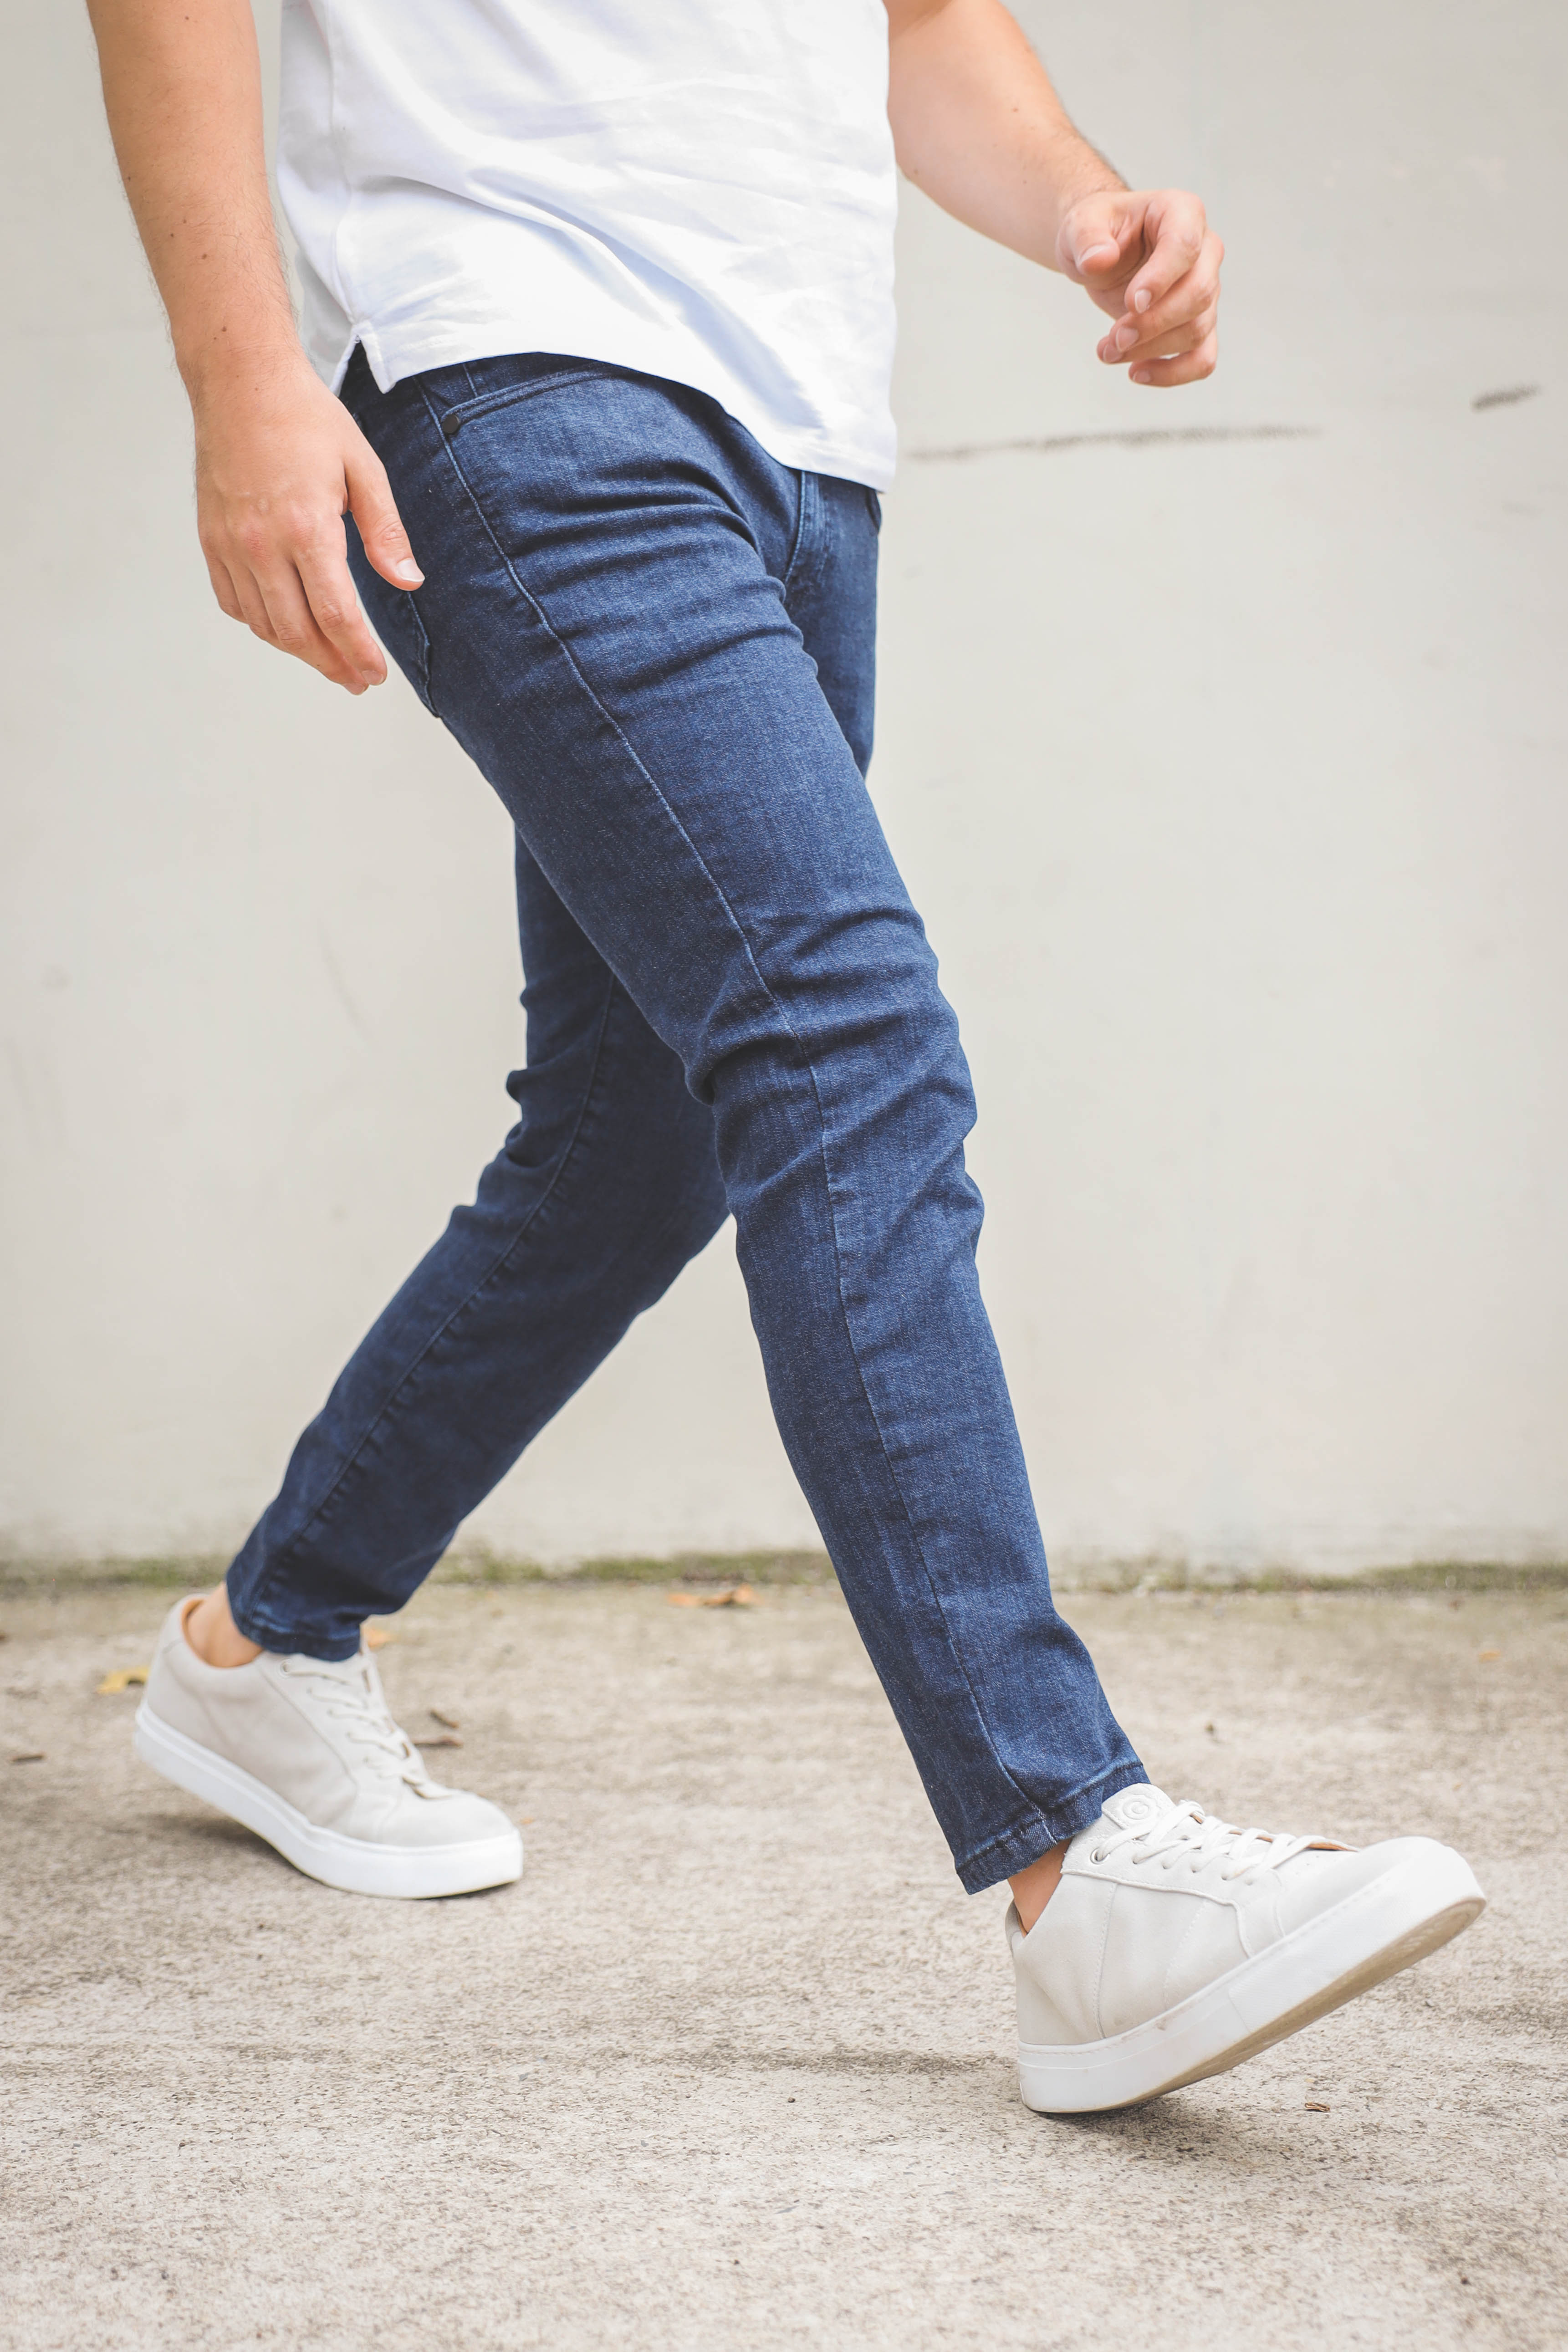 Male walking wearing blue jeans for short men with white canvas shoes